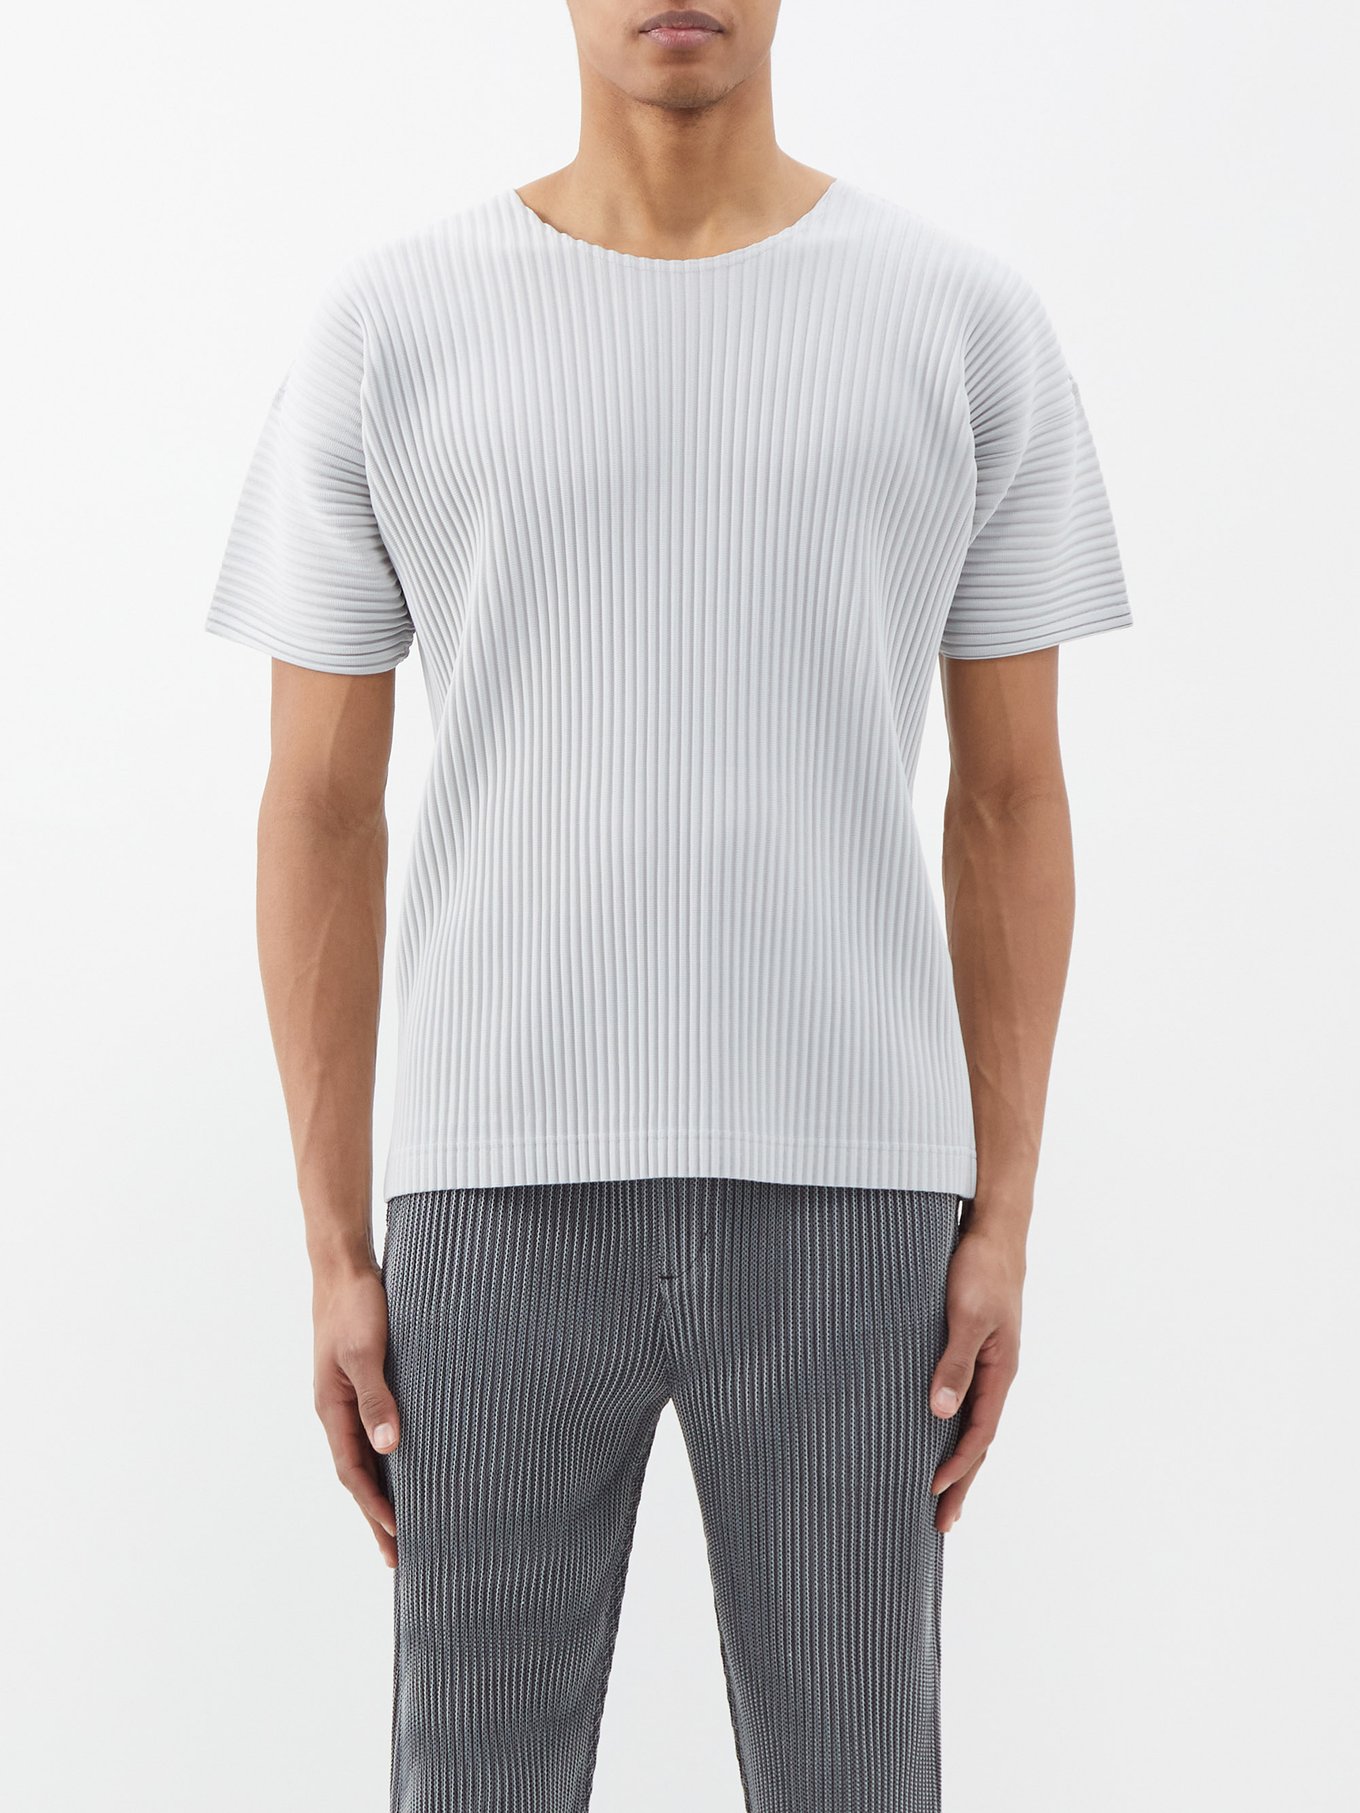 Technical-pleated T-shirt | Homme Plissé Issey Miyake